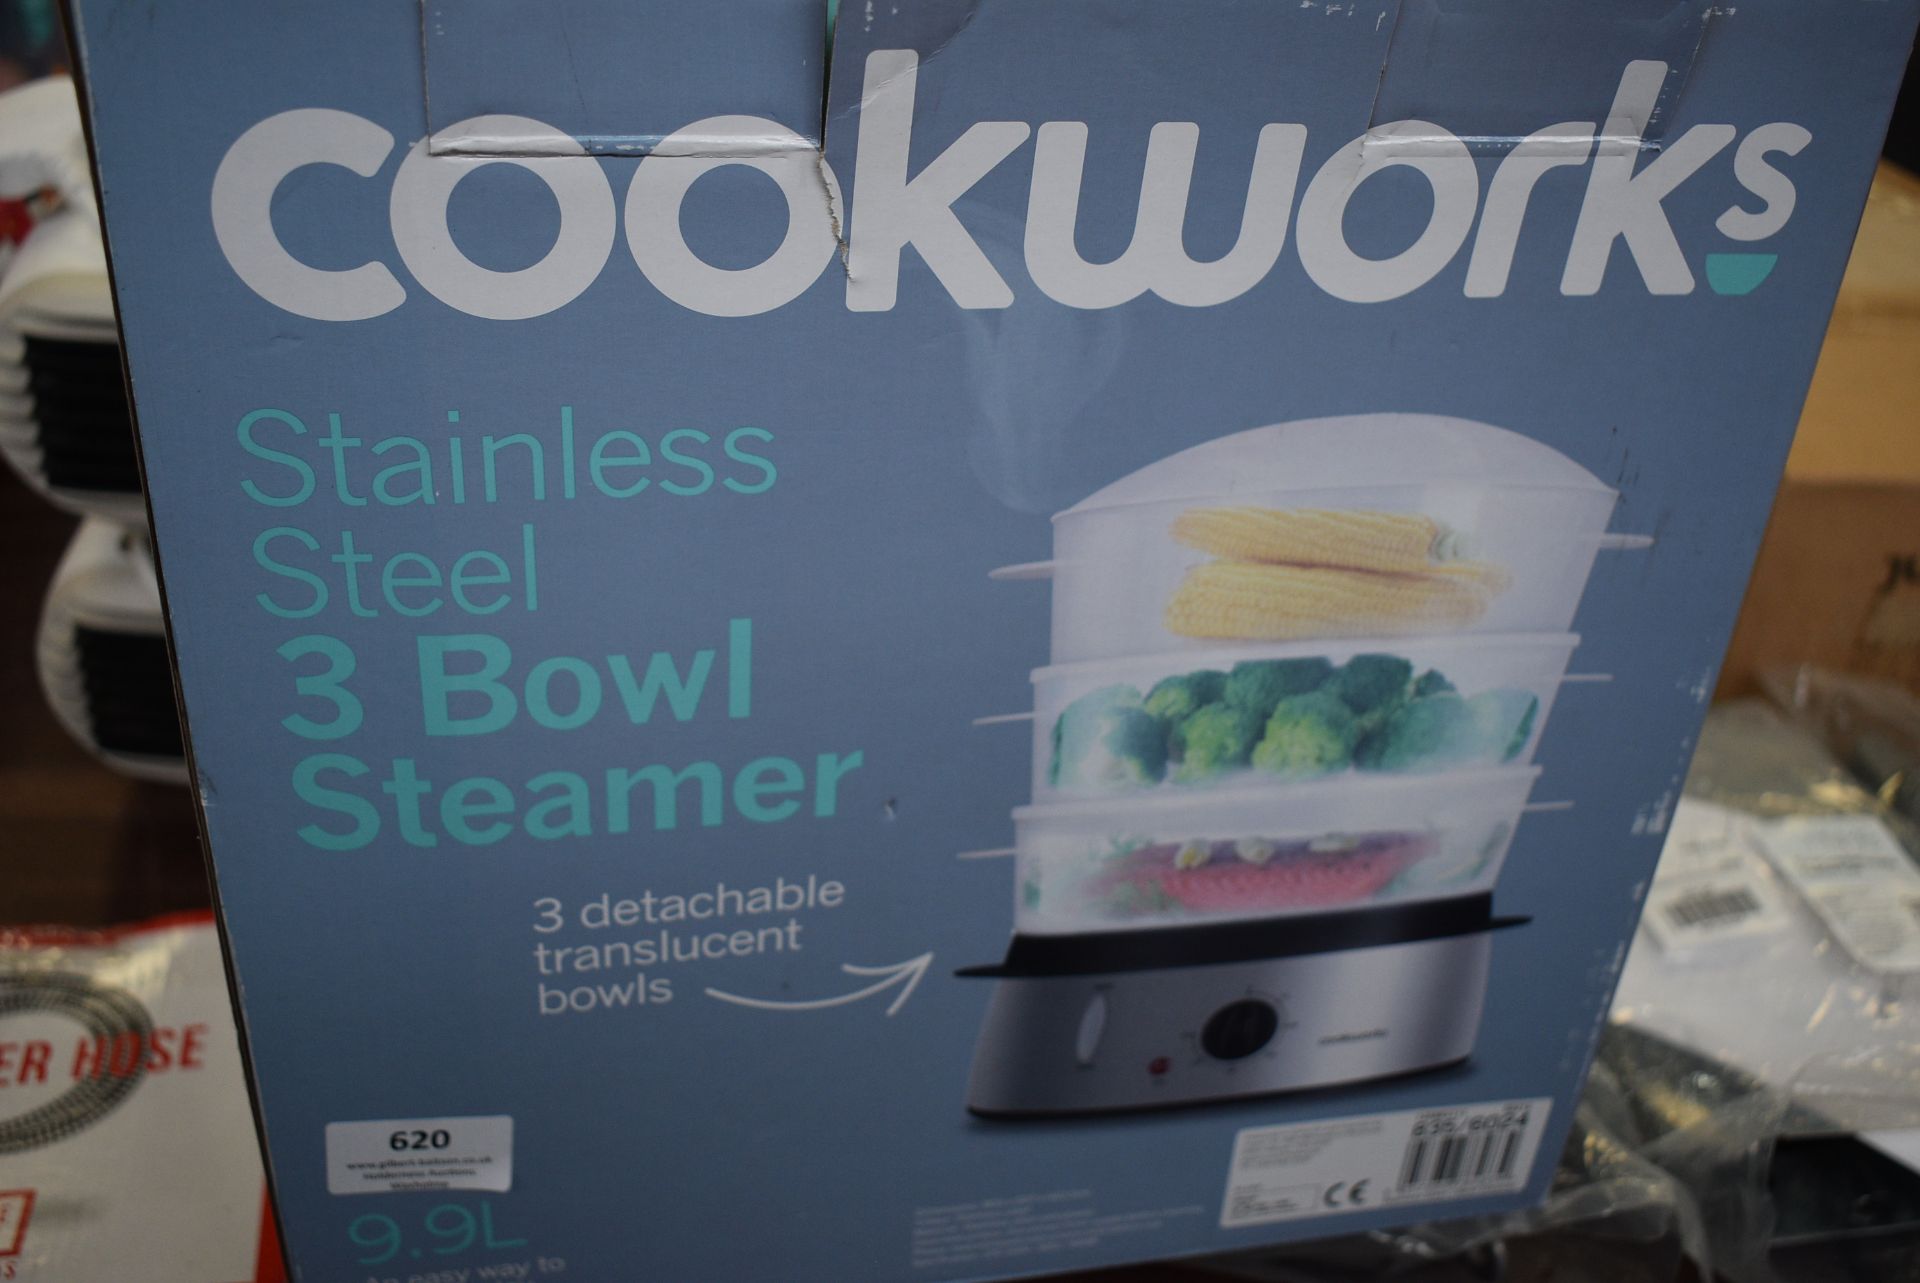 Stainless Steel Three Bowl Steamer - Image 2 of 4